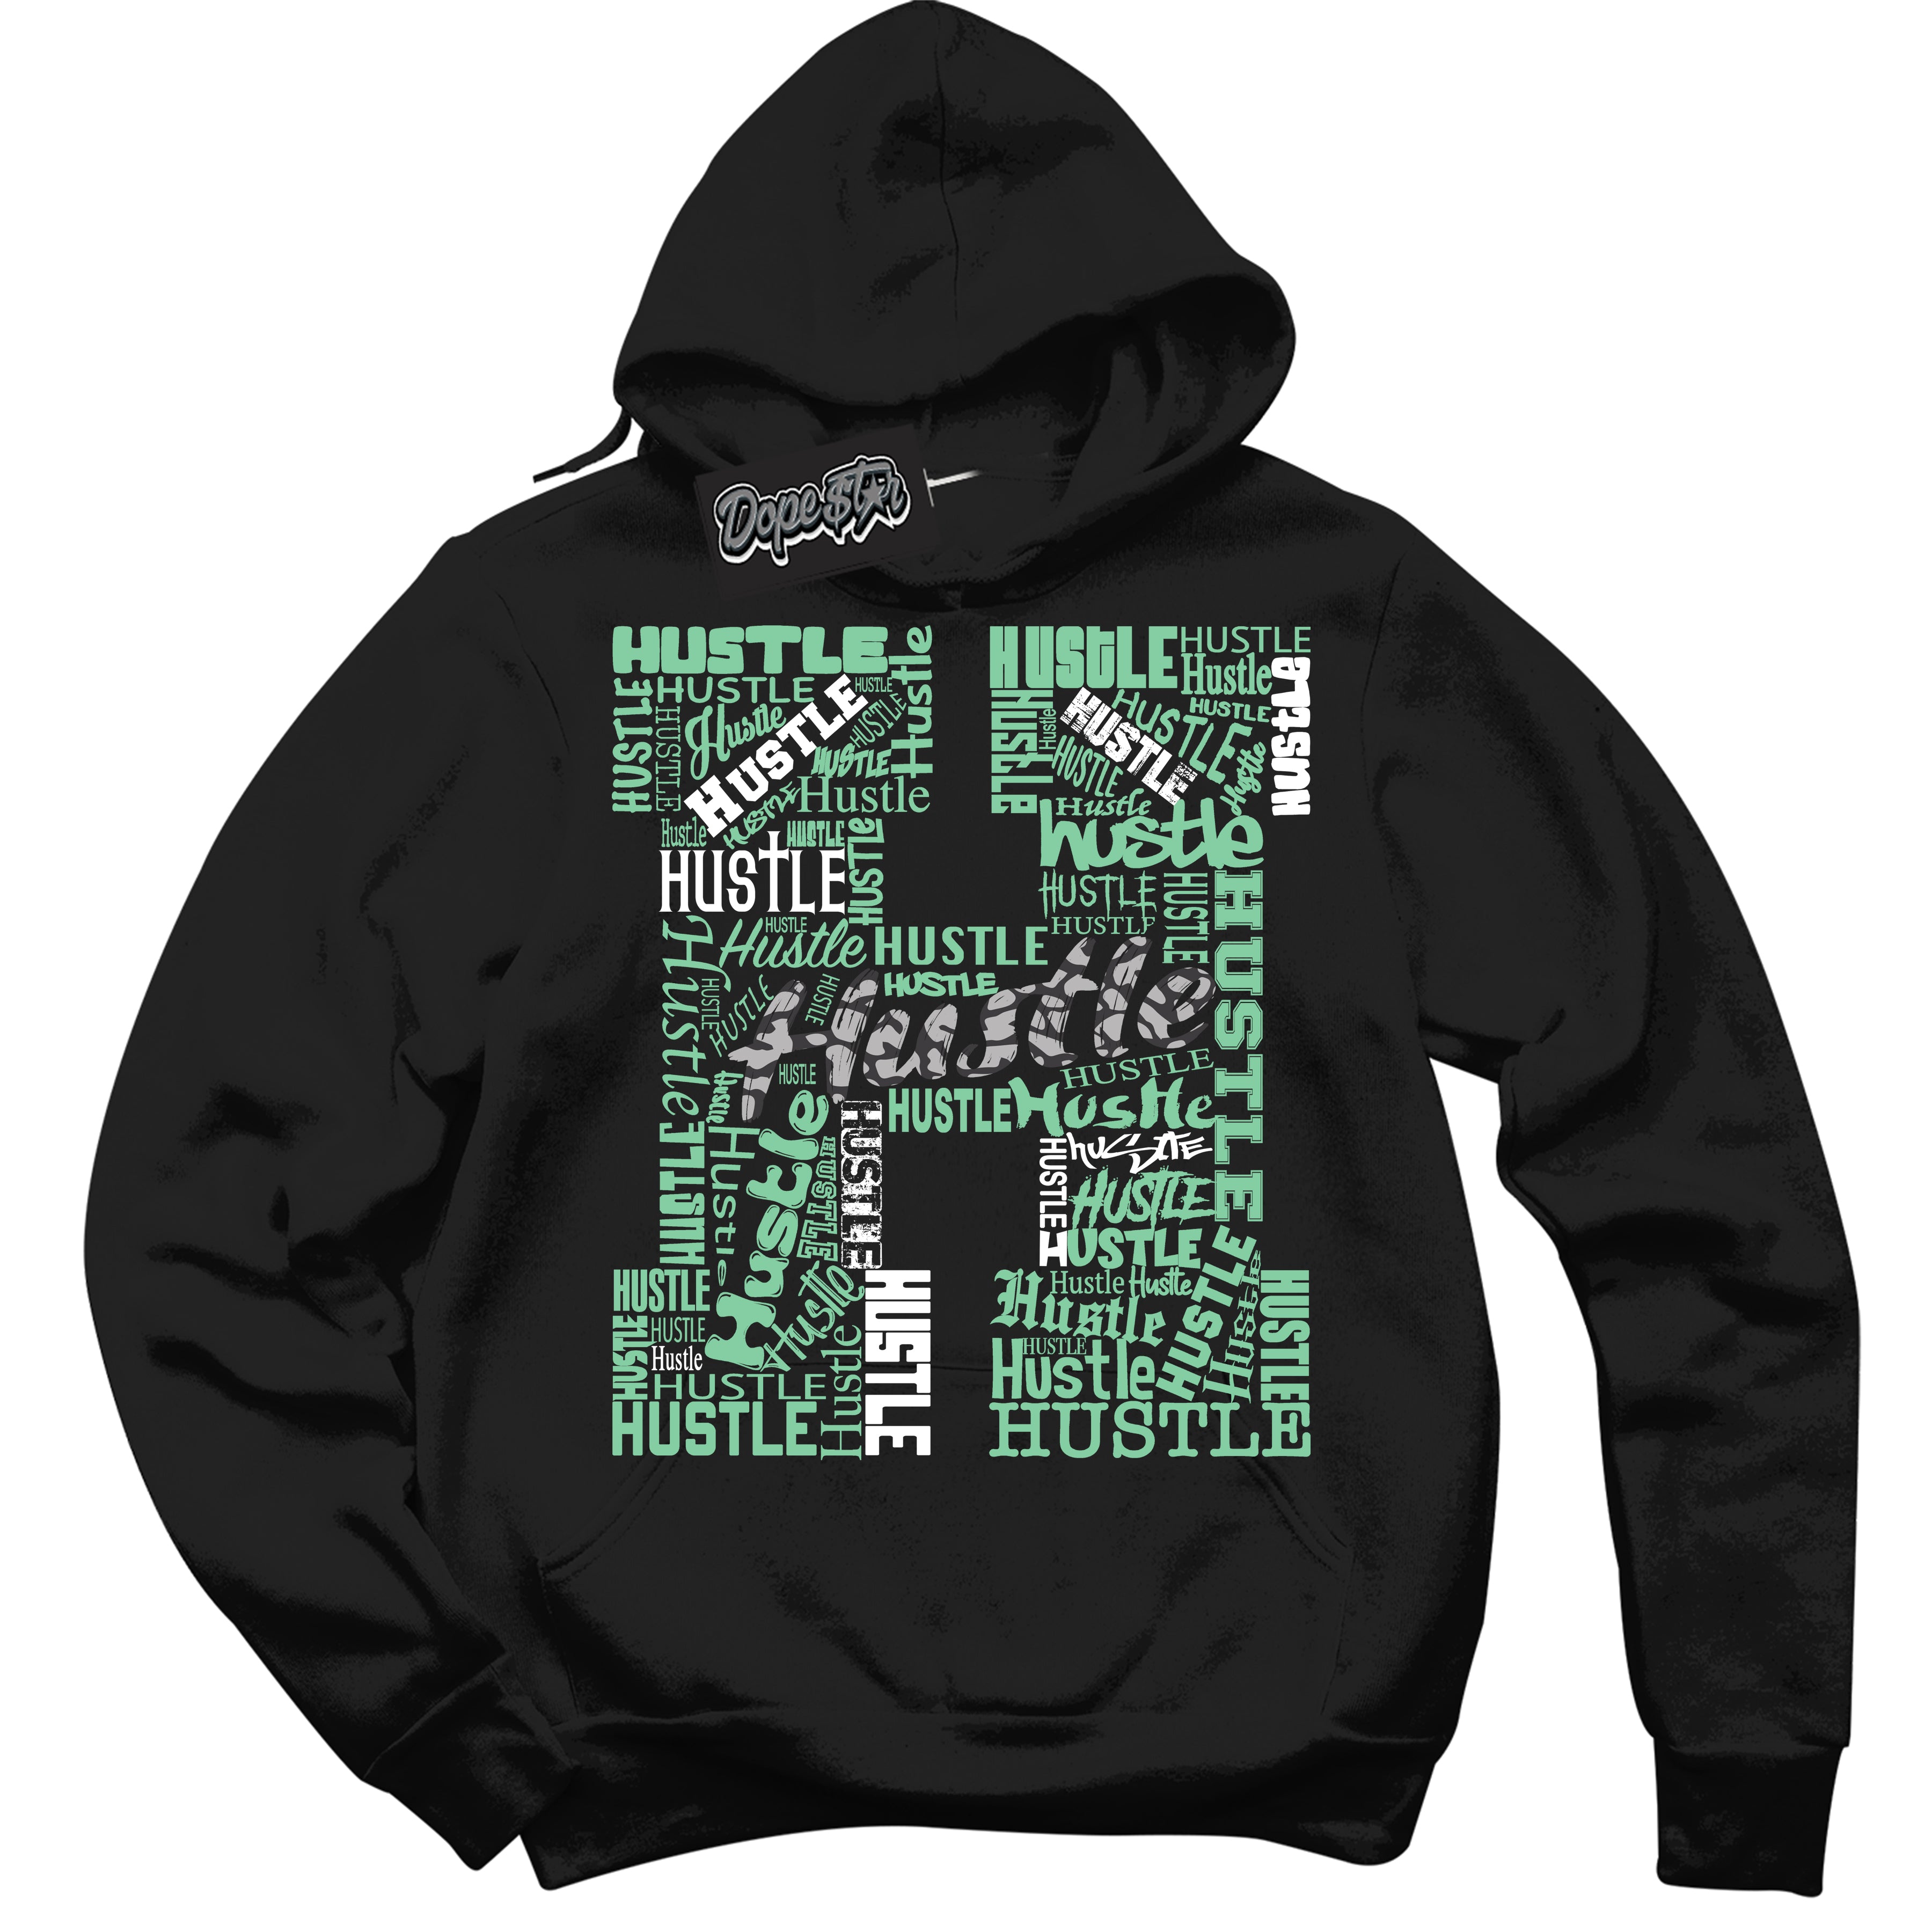 Cool Black Graphic DopeStar Hoodie with “ Hustle “ print, that perfectly matches Green Glow 3S sneakers